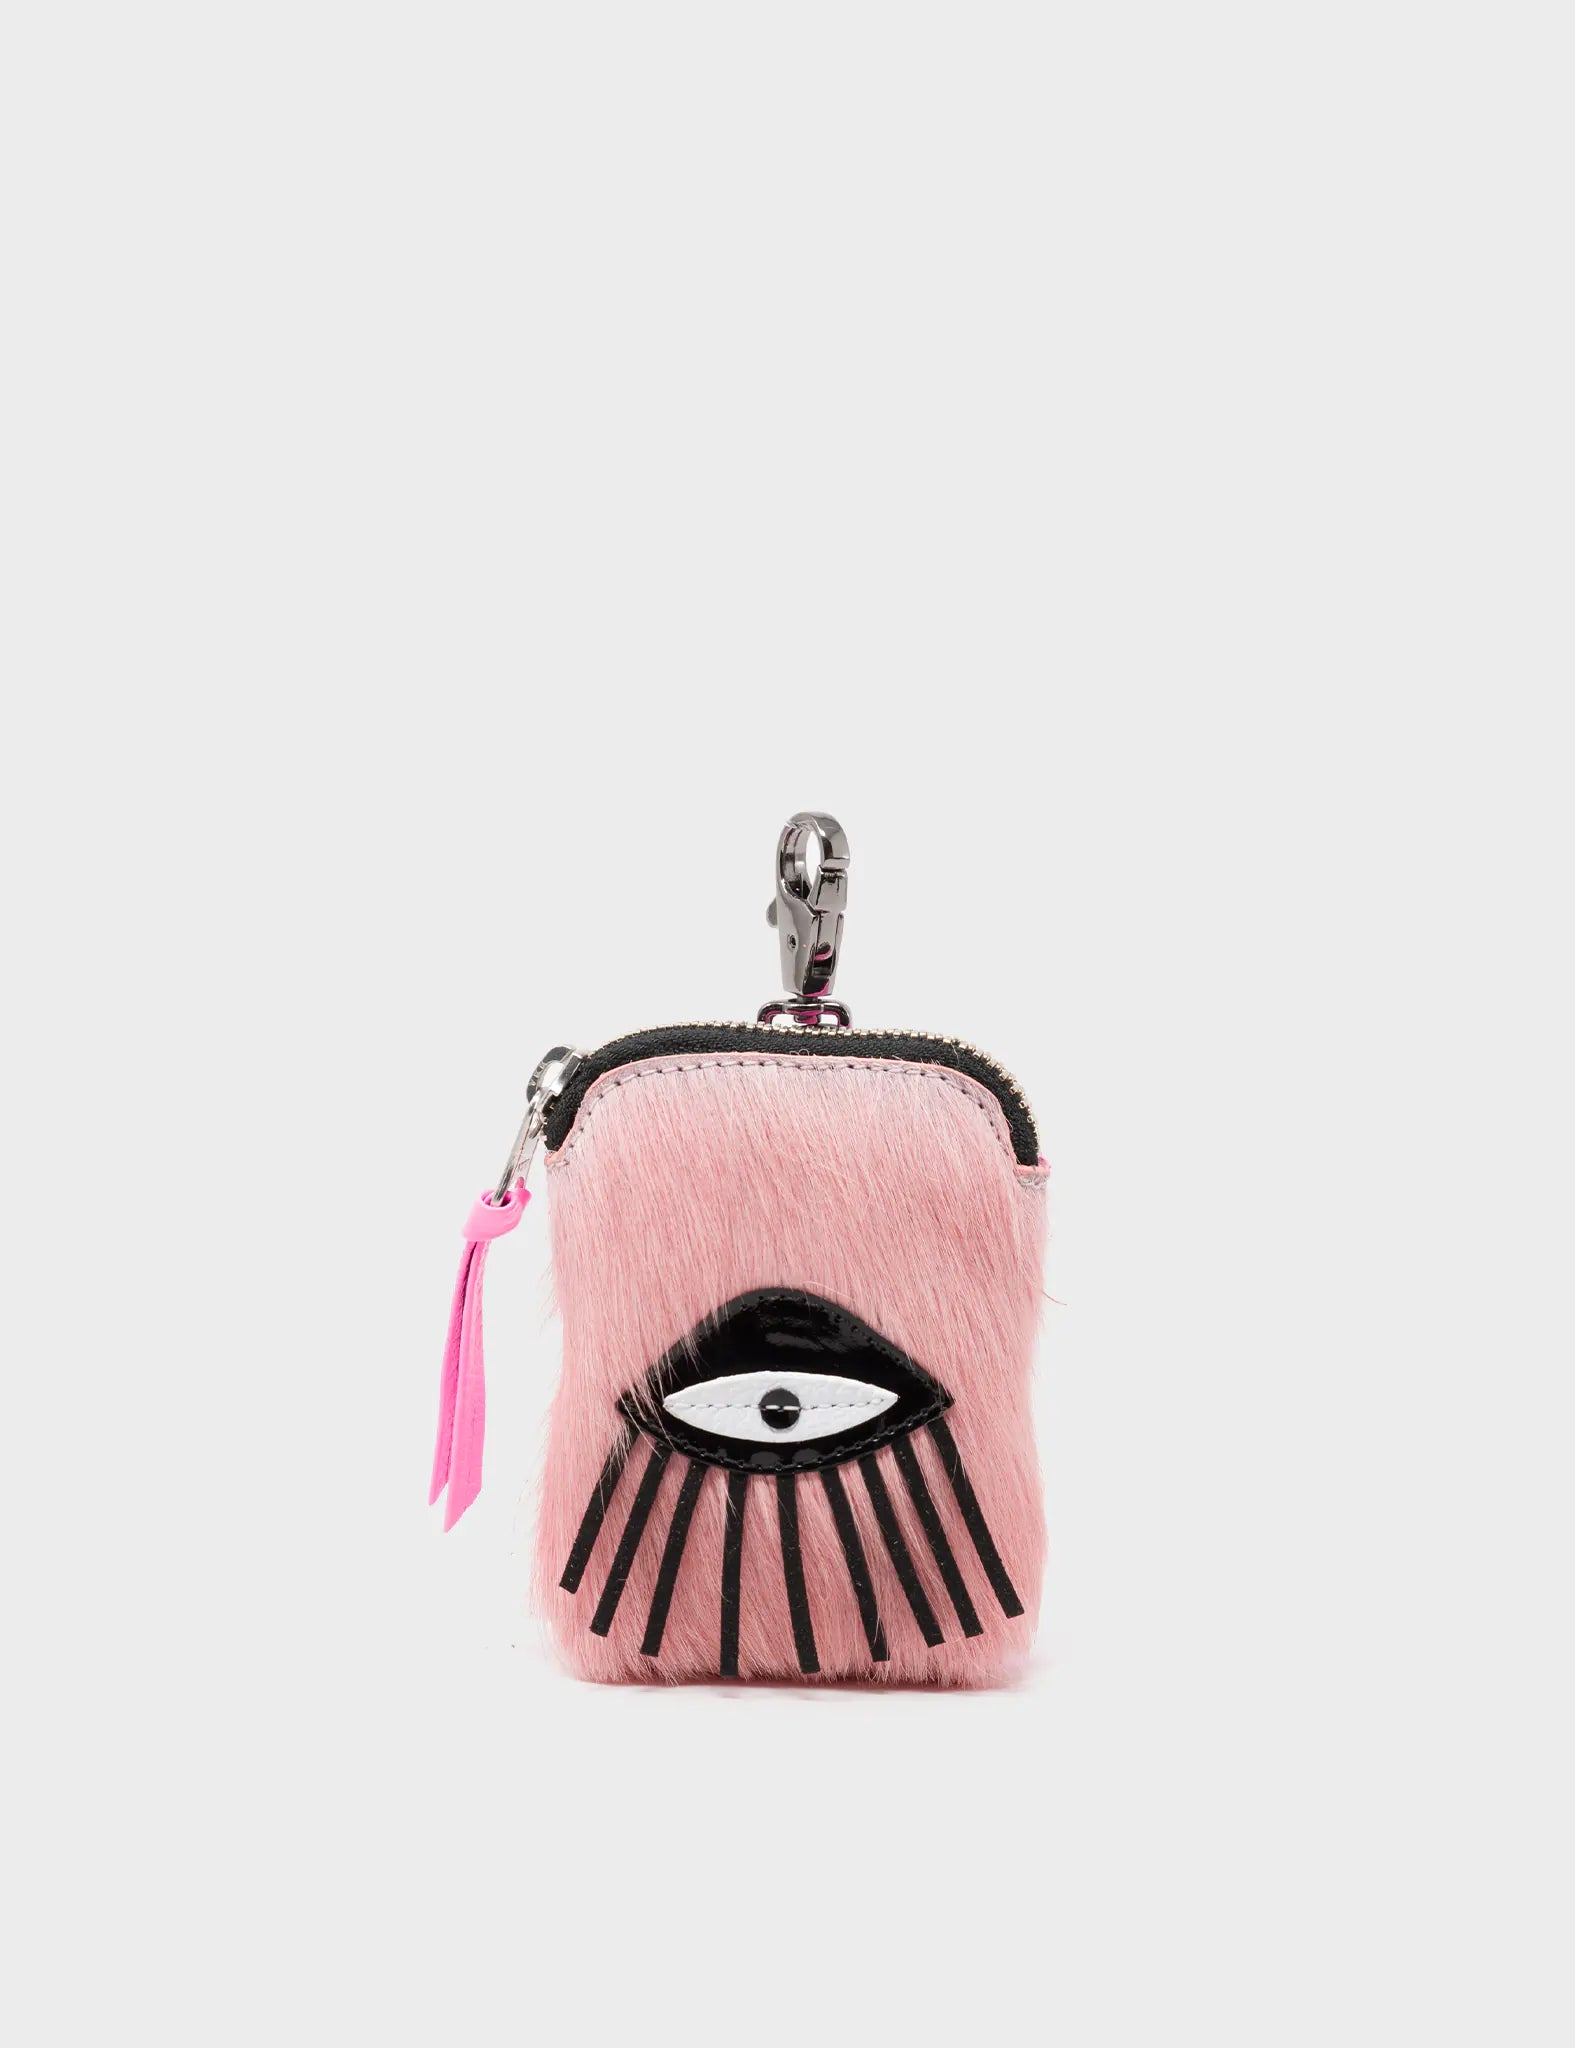 Pouch Charm - Pink Fur and Leather Keychain Eye Applique